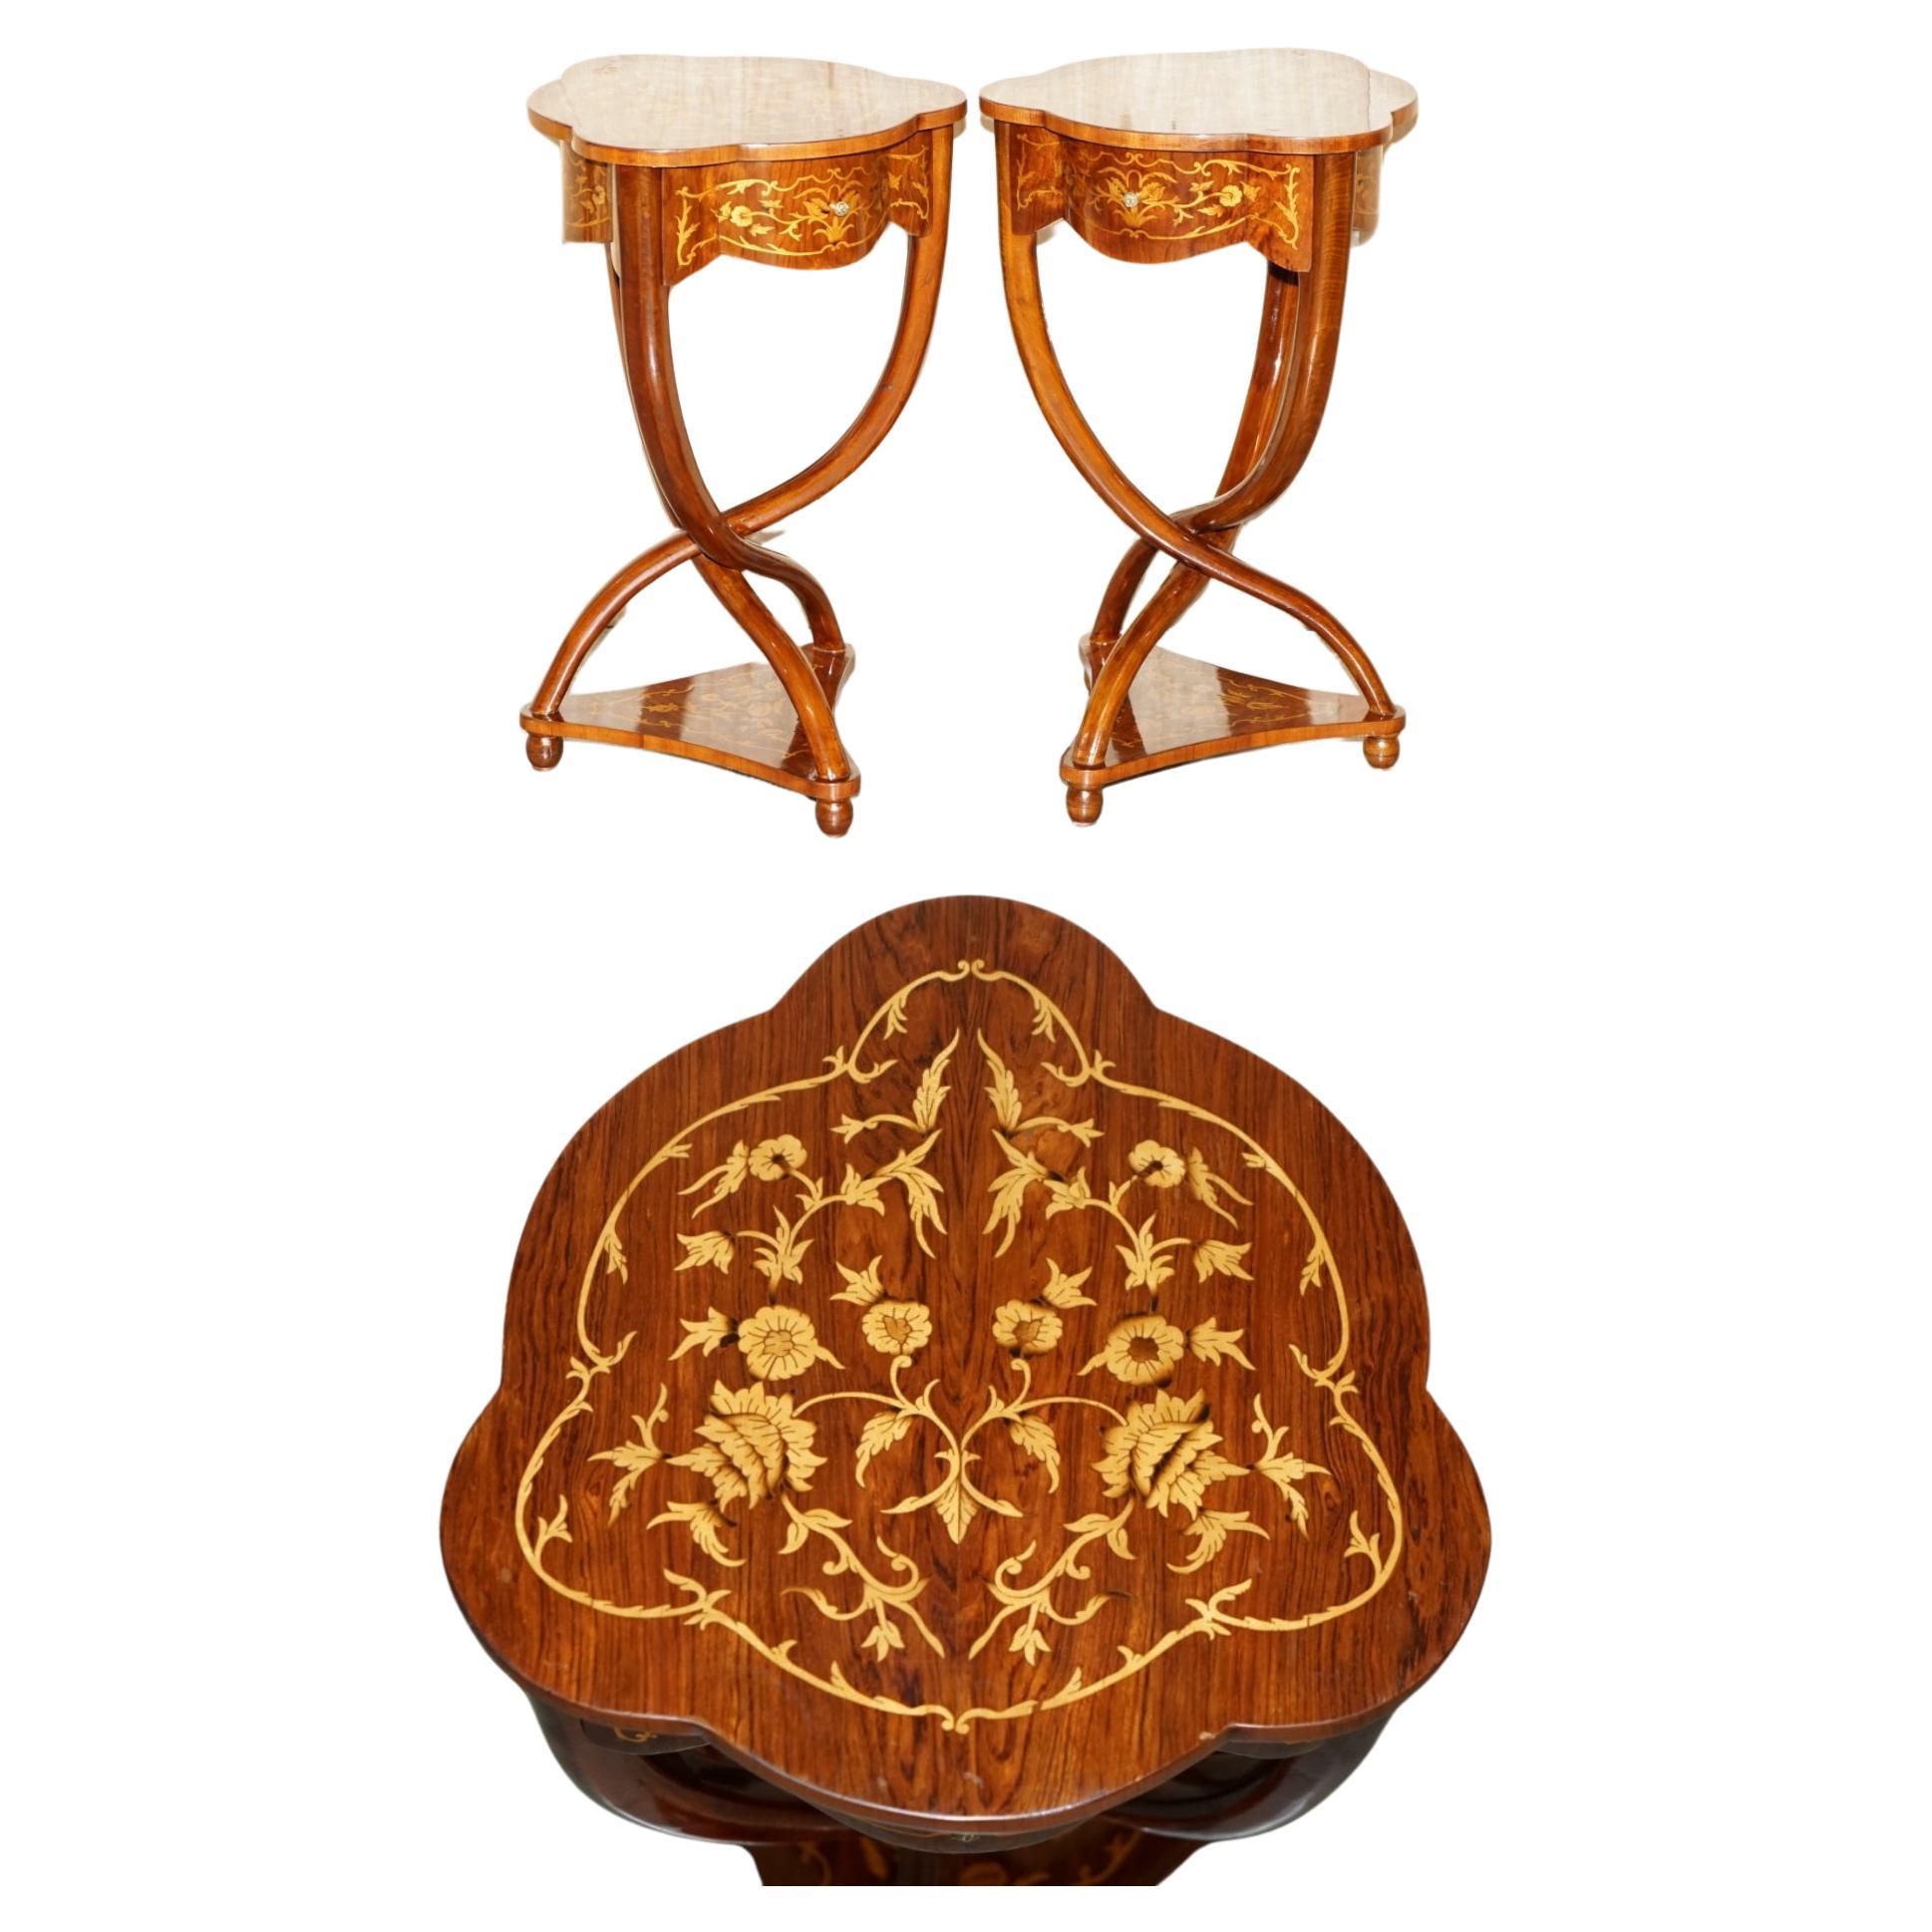 PAIR OF ART DECO STYLE SYCAMORE WOOD & WALNUT INLAID PEDESTAL SIDE END TABLEs For Sale